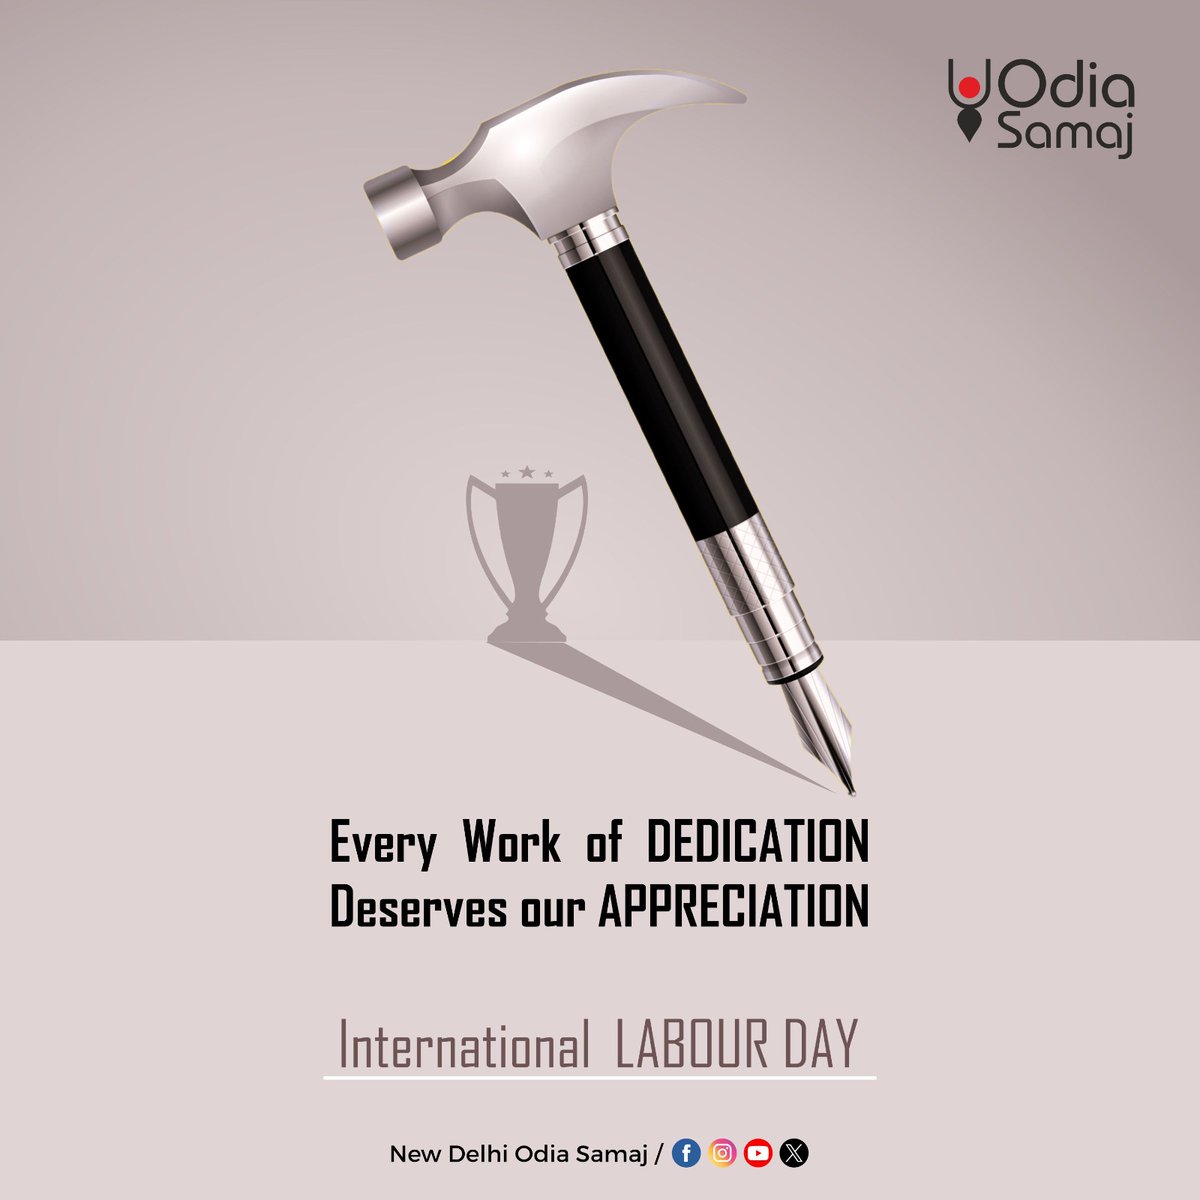 To the hands that build, create, and nurture—your efforts uphold the world. 🙌

Happy International Labour Day!

#InternationalLabourDay #LabourDay #labourday2024 #happylabourday #labourdayweekend #RespectWorkers #1stMayDay #socialequality #OdiaSamaj